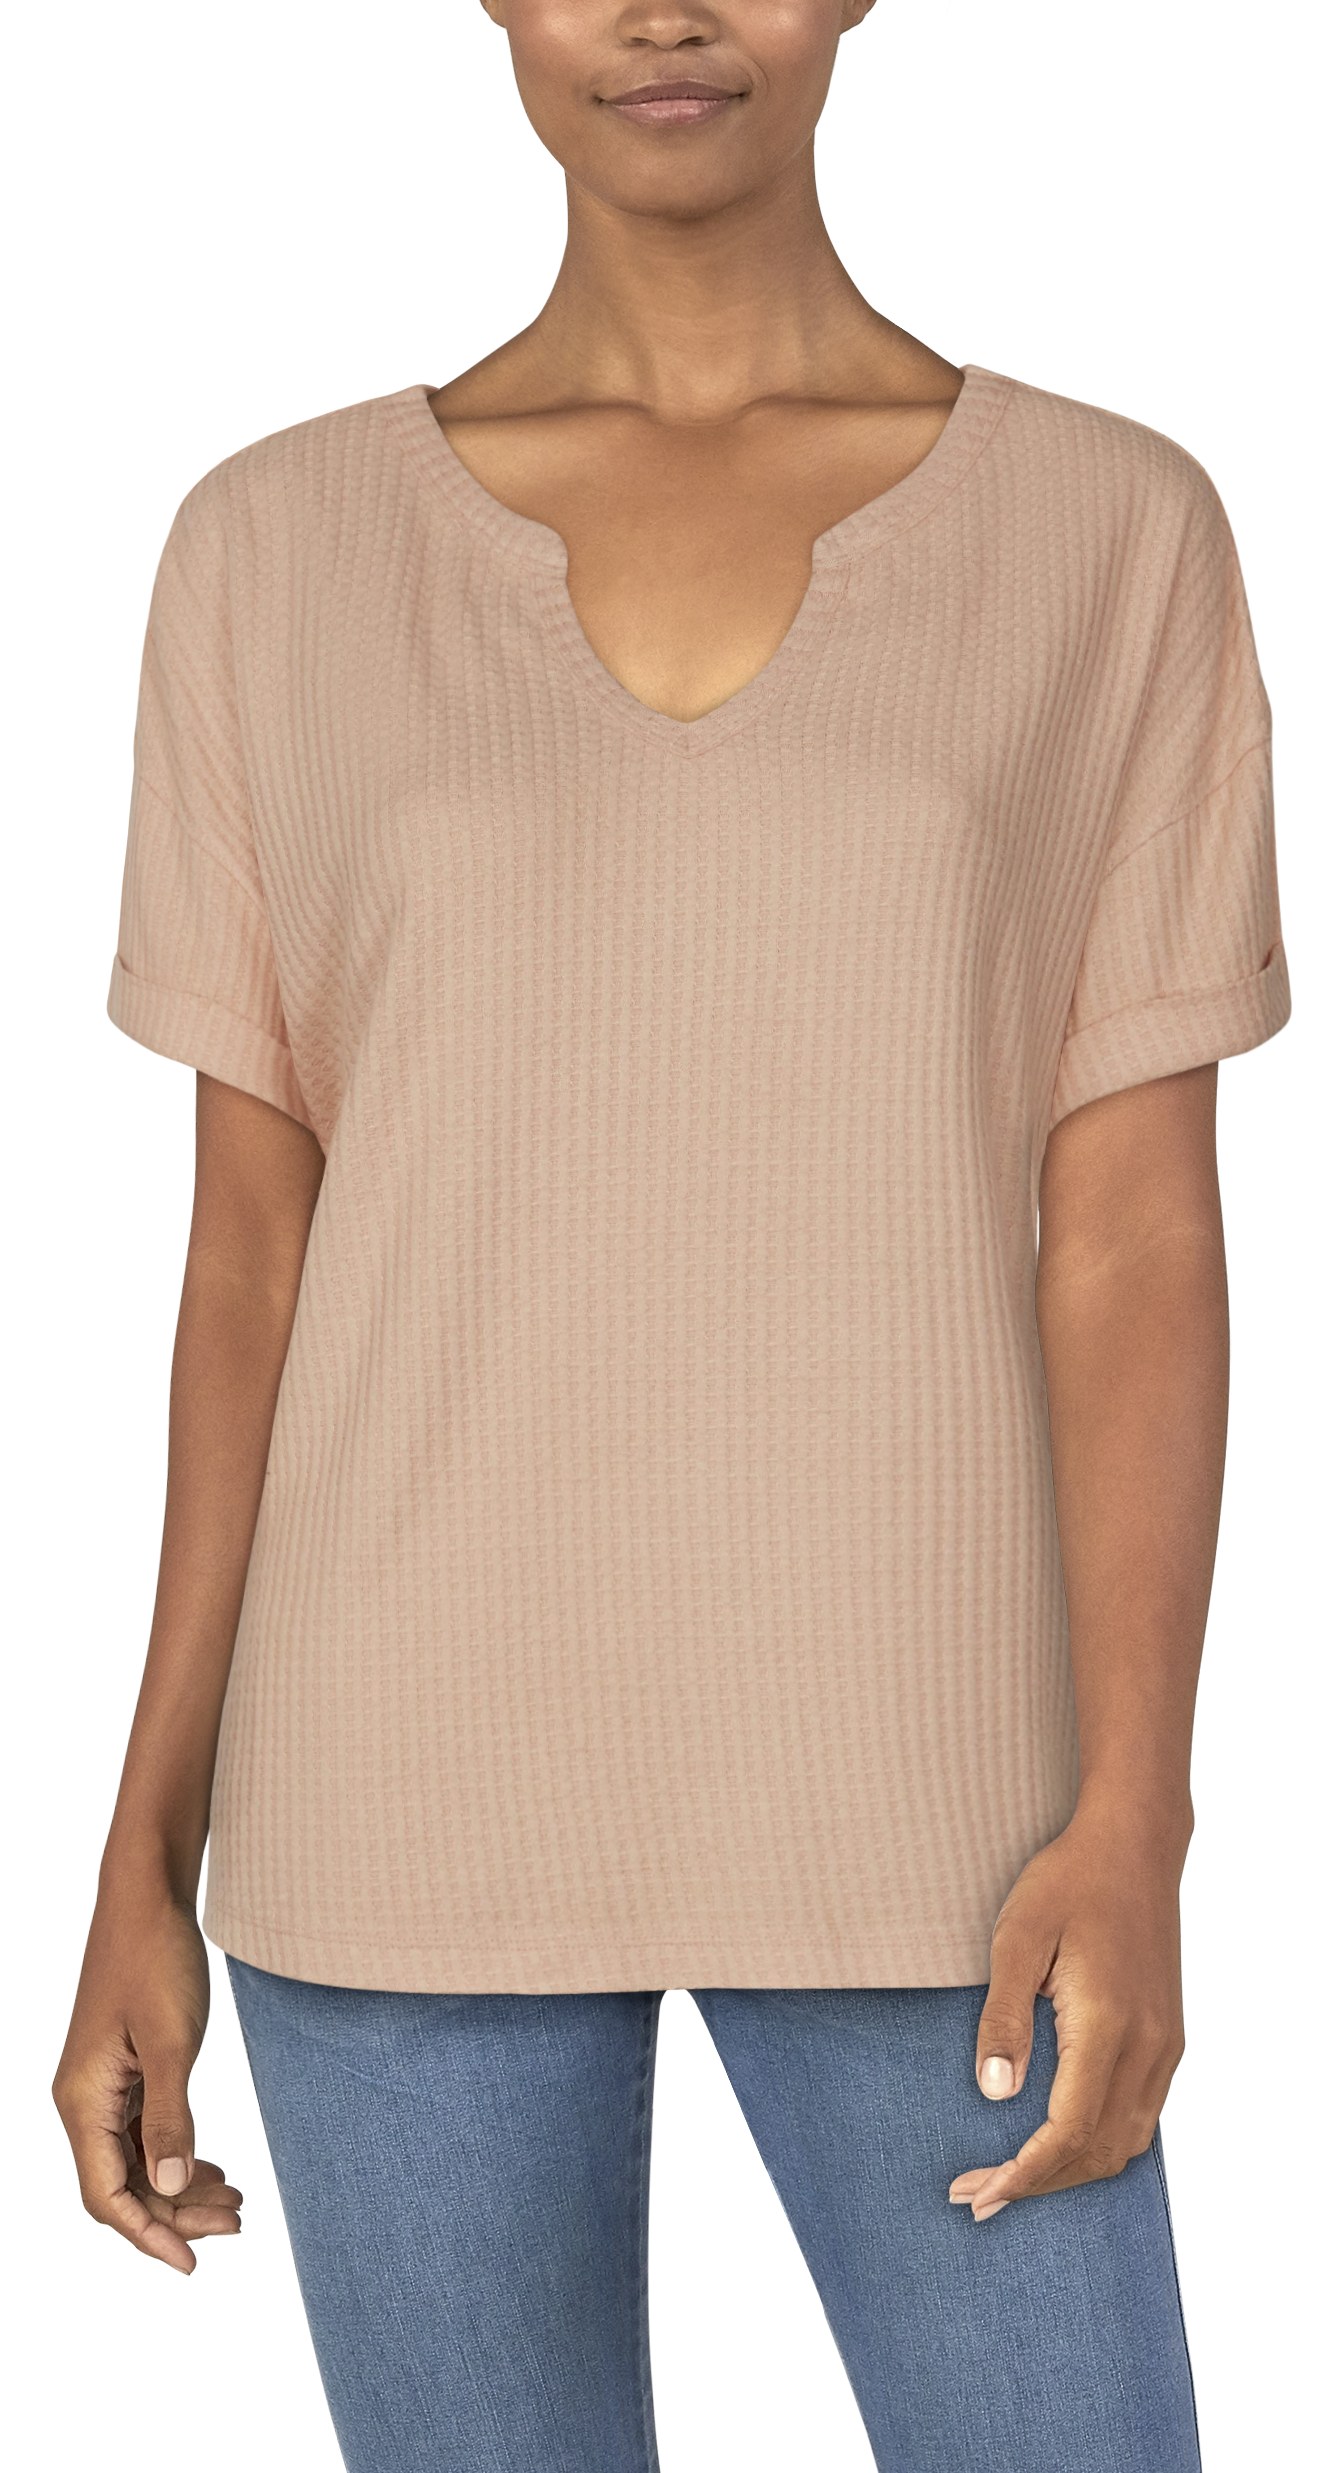 Natural Reflections Brush Creek Waffle Short-Sleeve Shirt for Ladies - Almost Apricot - S